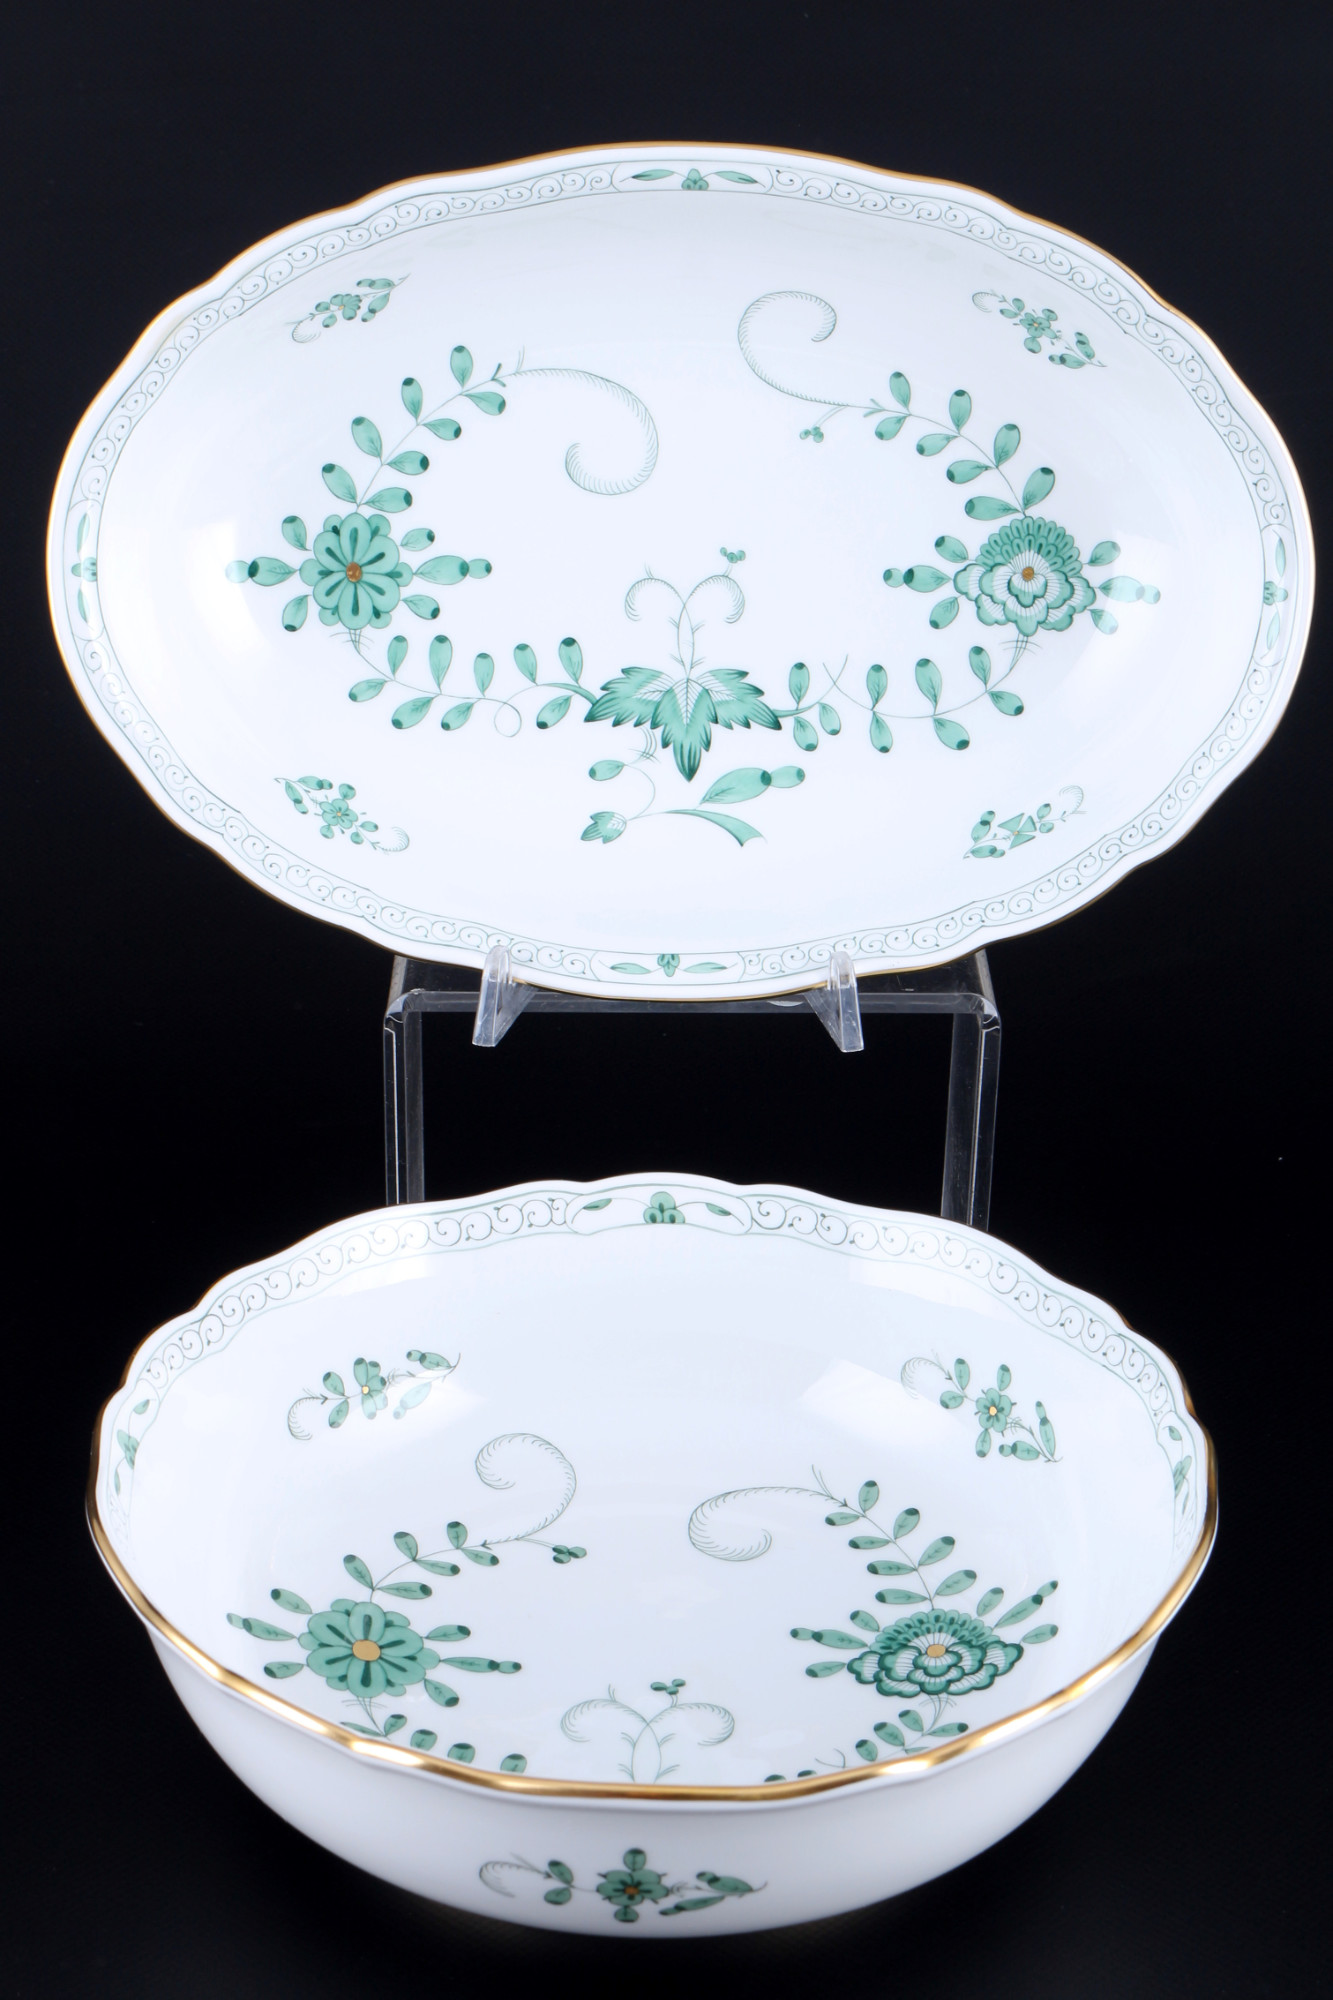 Meissen Indian Green dinner service for 8 persons 1st choice, Speiseservice für 8 Personen 1. Wahl, - Image 4 of 6